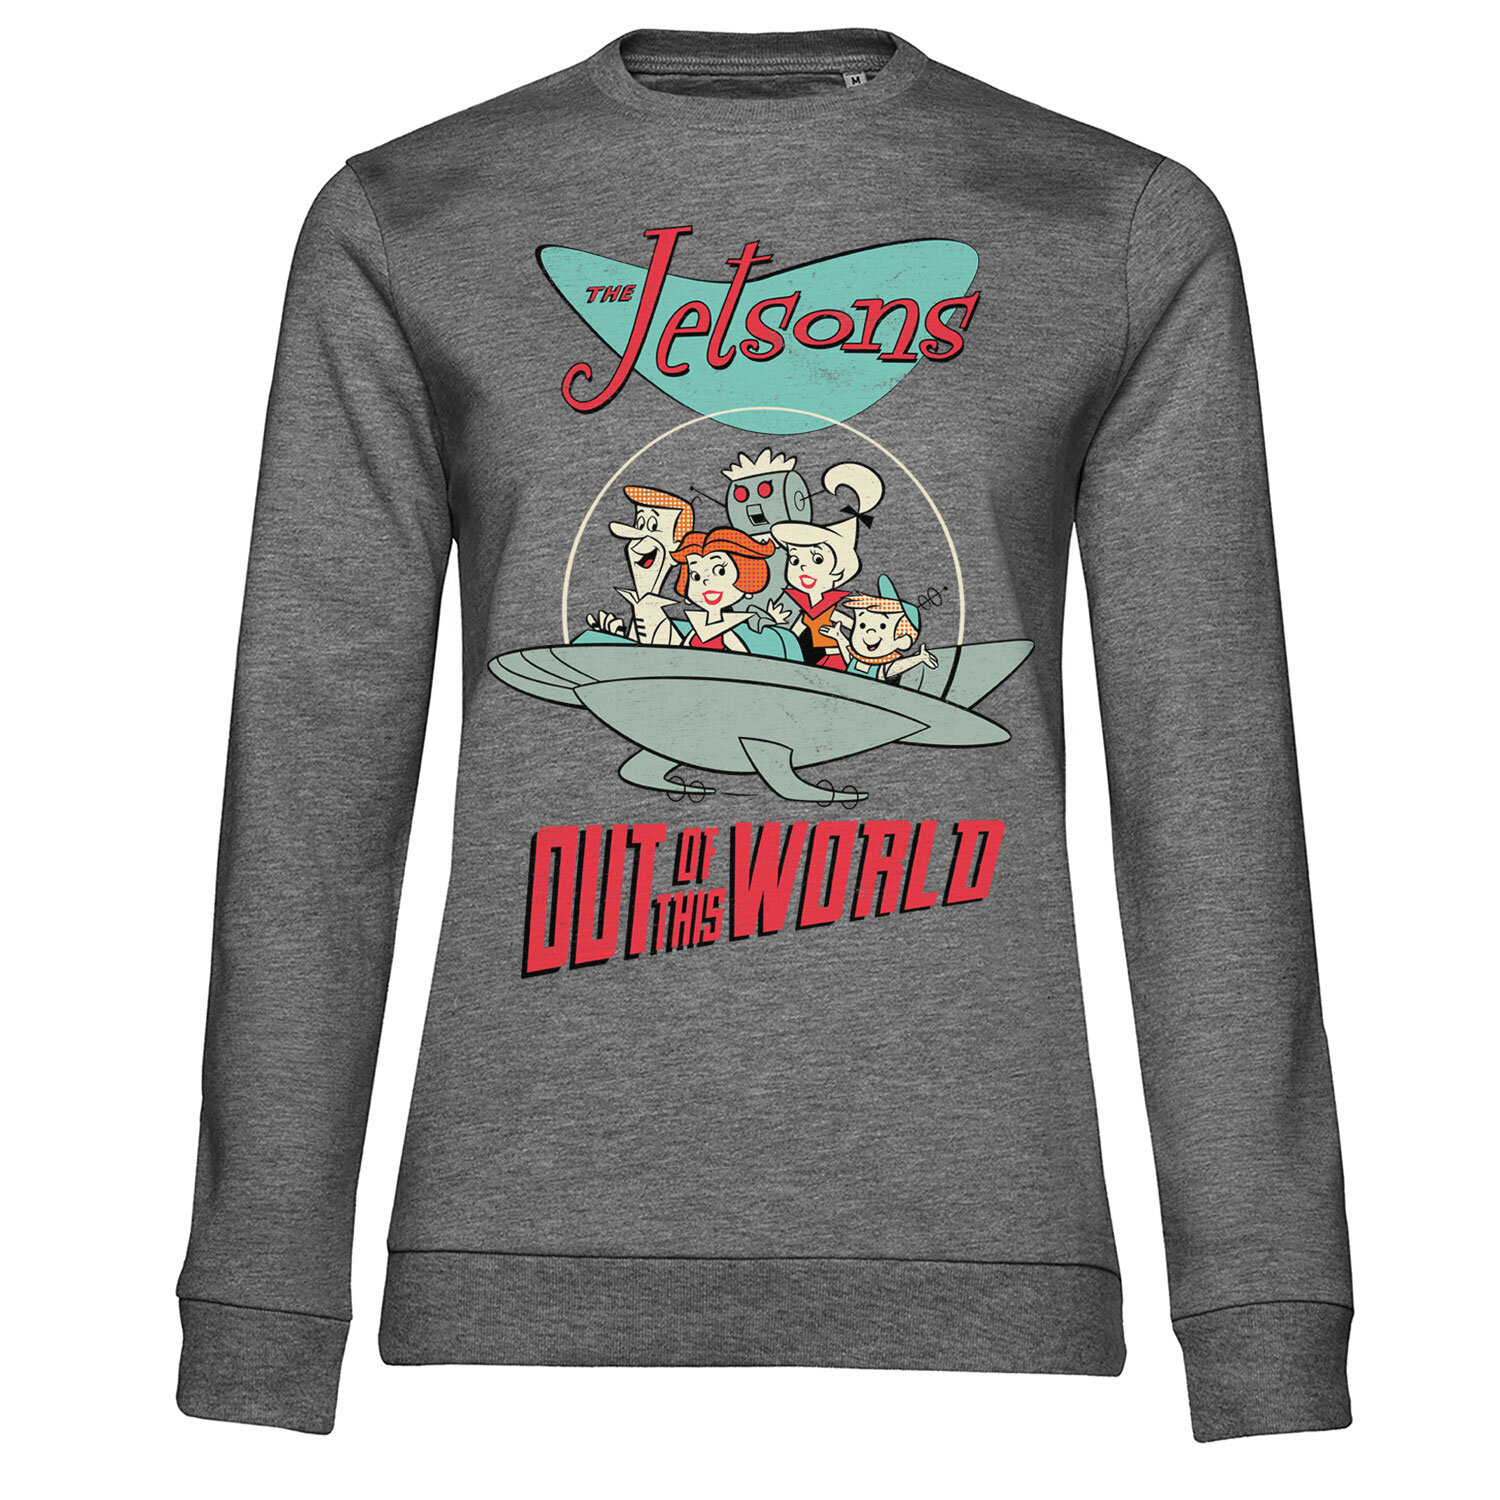 The Jetsons - Out Of This World Girly Sweatshirt